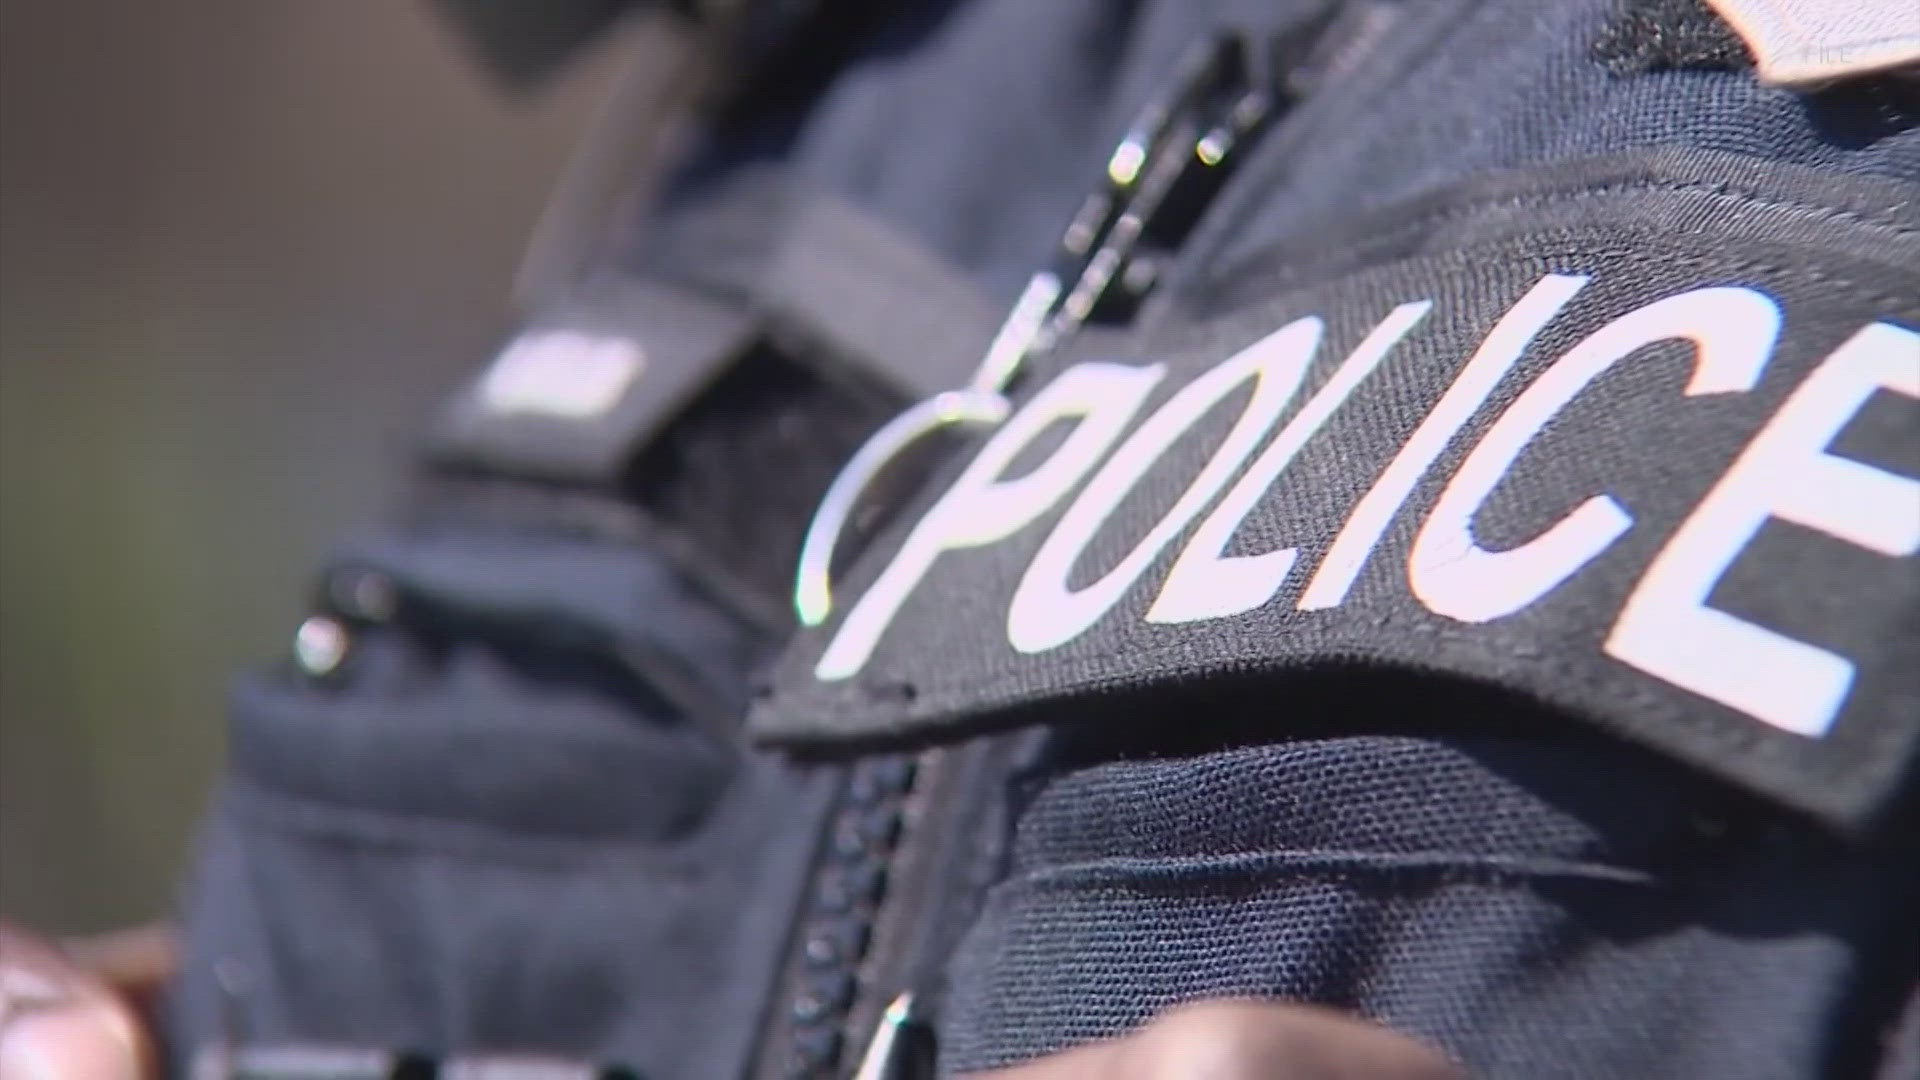 The agreement between the city and Seattle Police Officers' Guild covers the first three of a potential four-year contract.